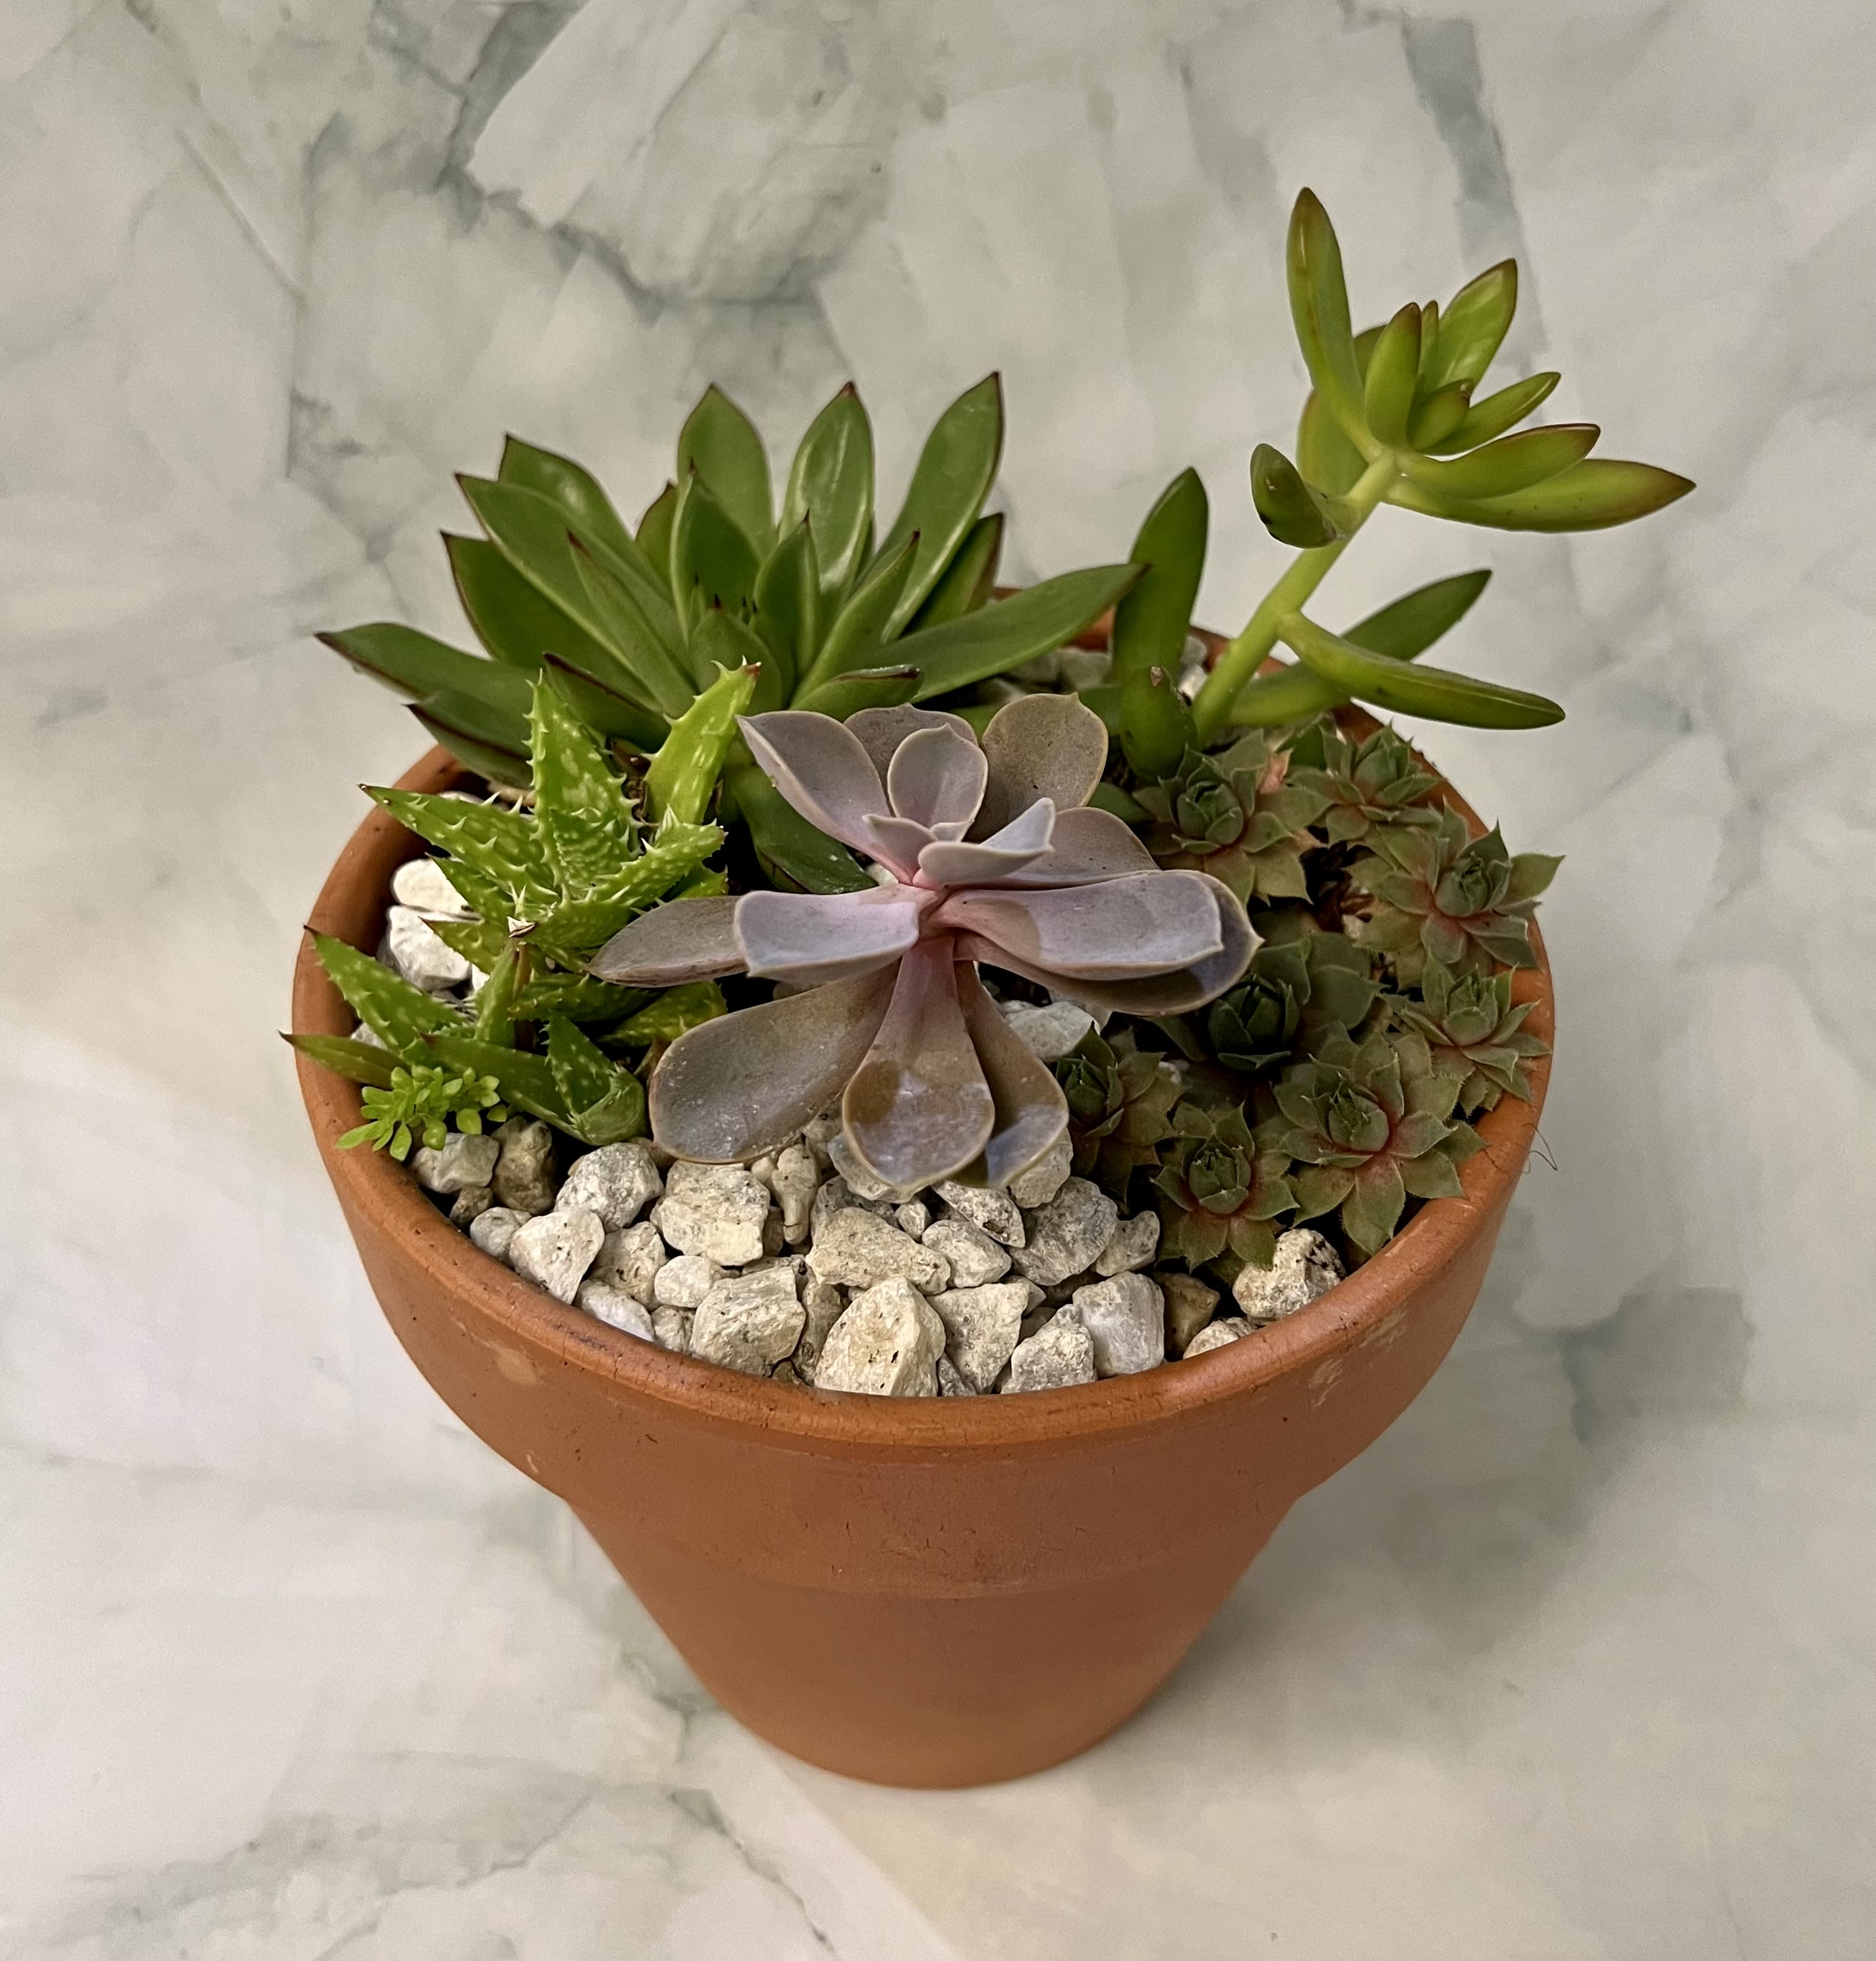 Terracotta Succulent Garden  - This succulent garden is one of a kind. Each garden is hand picked at the greenhouse so not one arrangement looks the same. We hand pick the freshest succulents that are available. The container is 6 inchs and includes about 5 various succulents. 